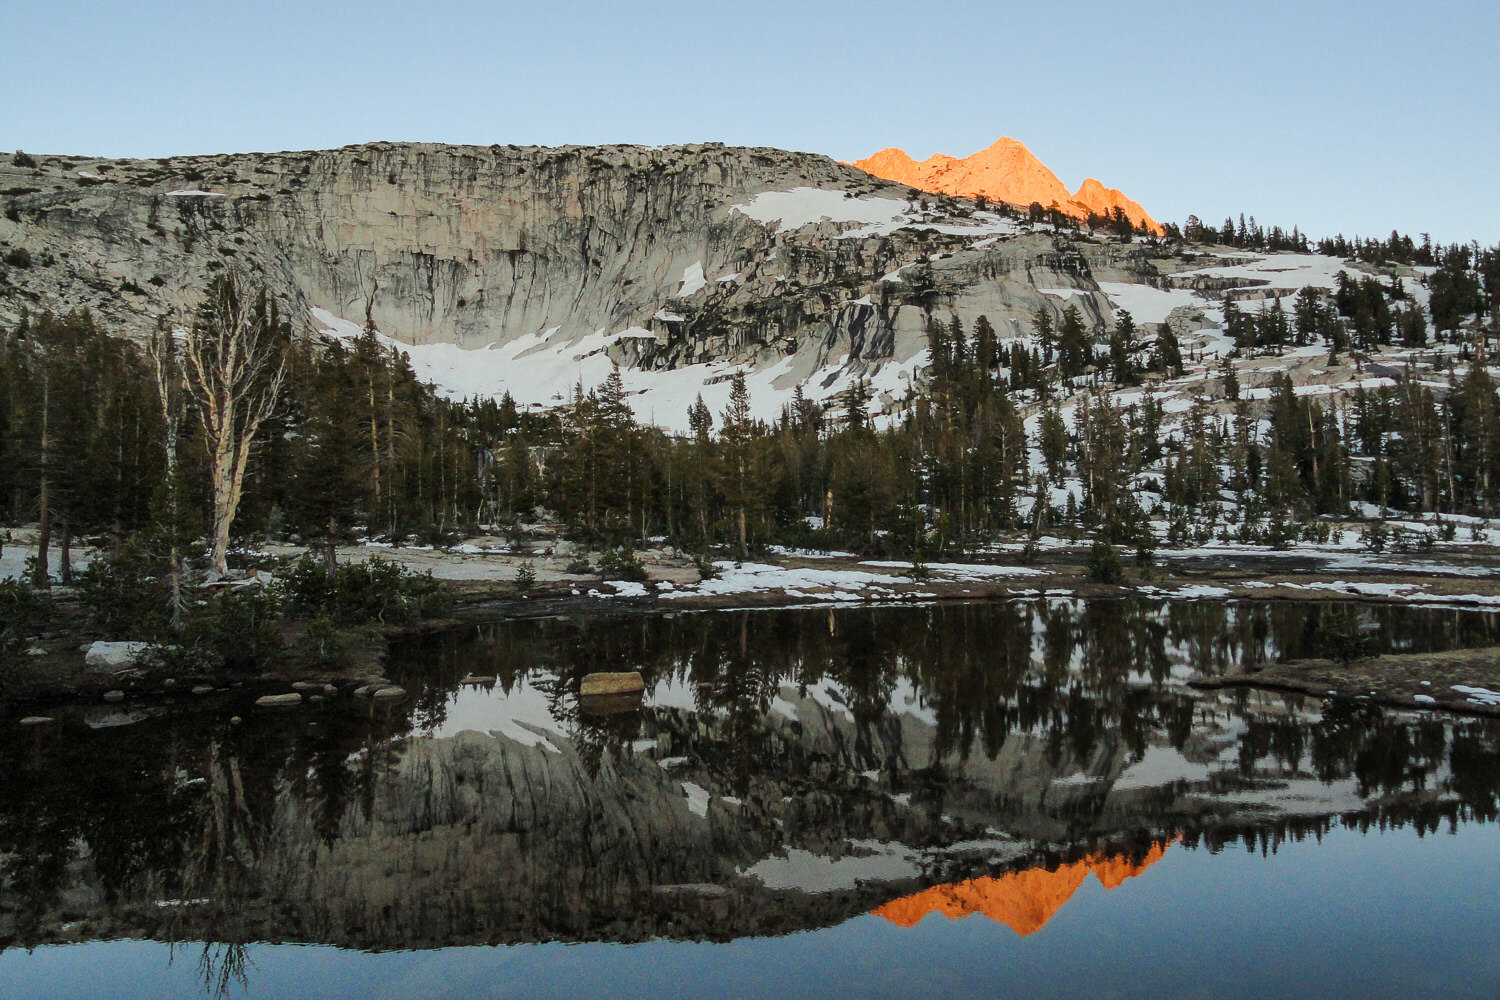 A typical stunning sunset in the Sierras